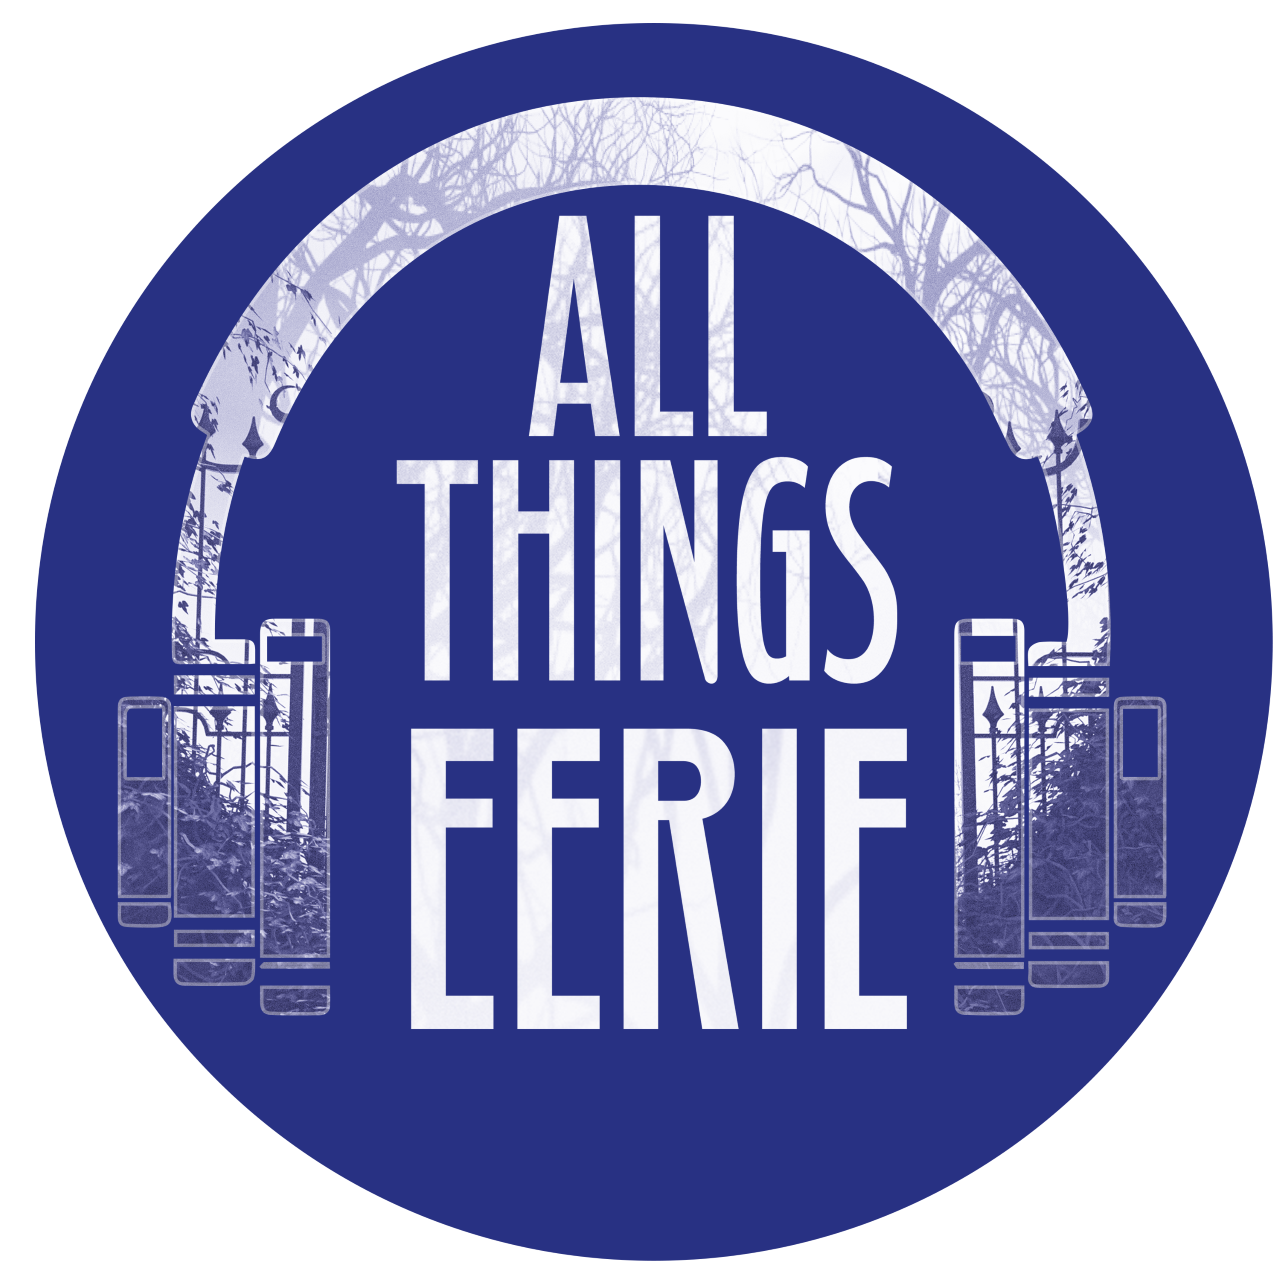 All Things Eerie Podcast